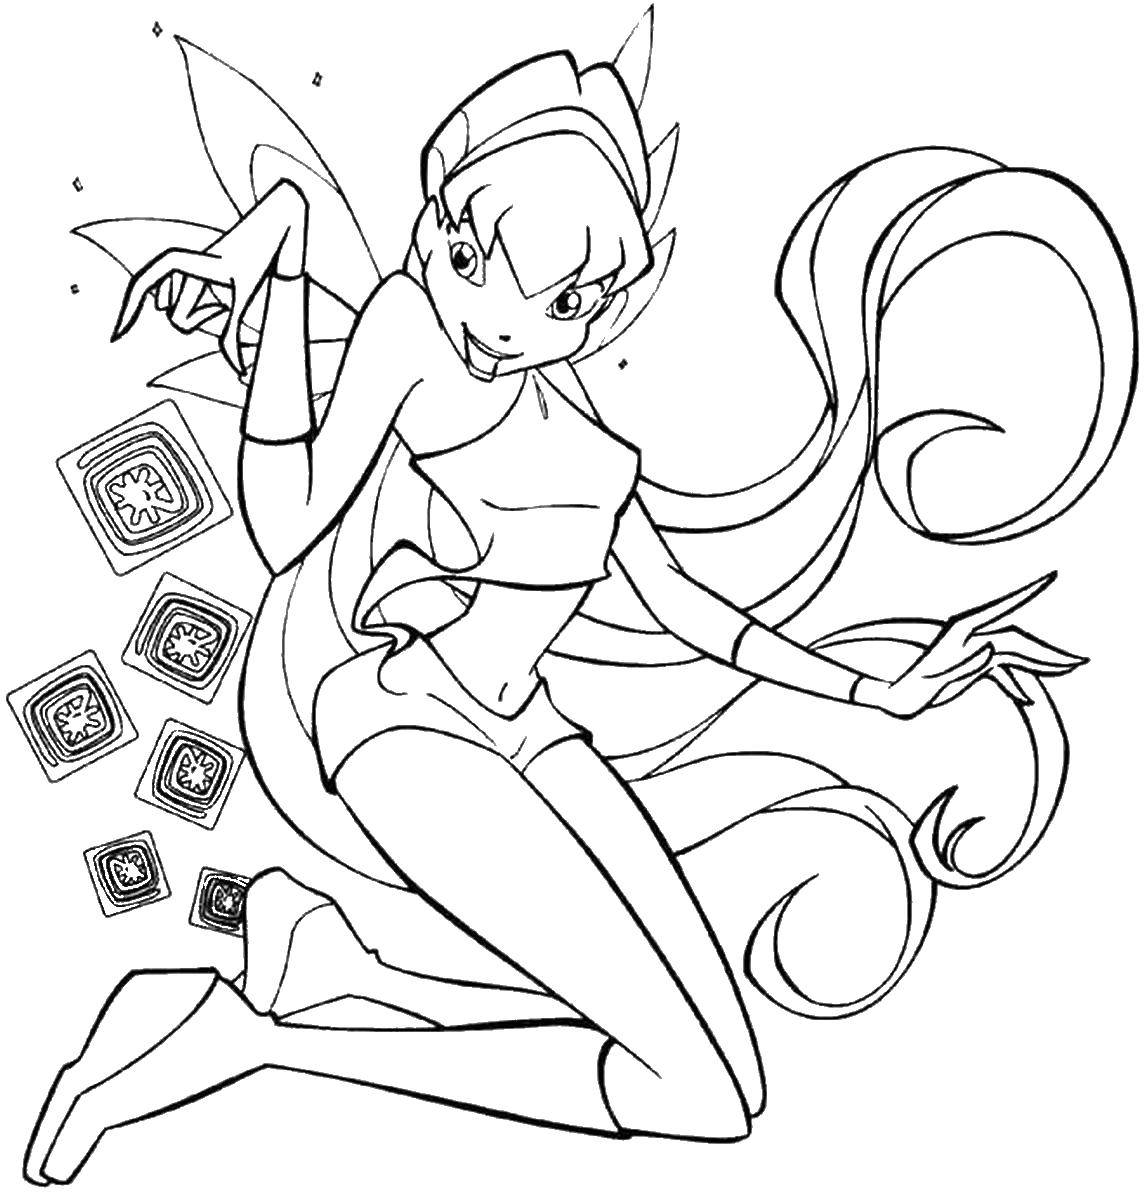 Coloring Stella and cards. Category Winx. Tags:  Character cartoon, Winx.